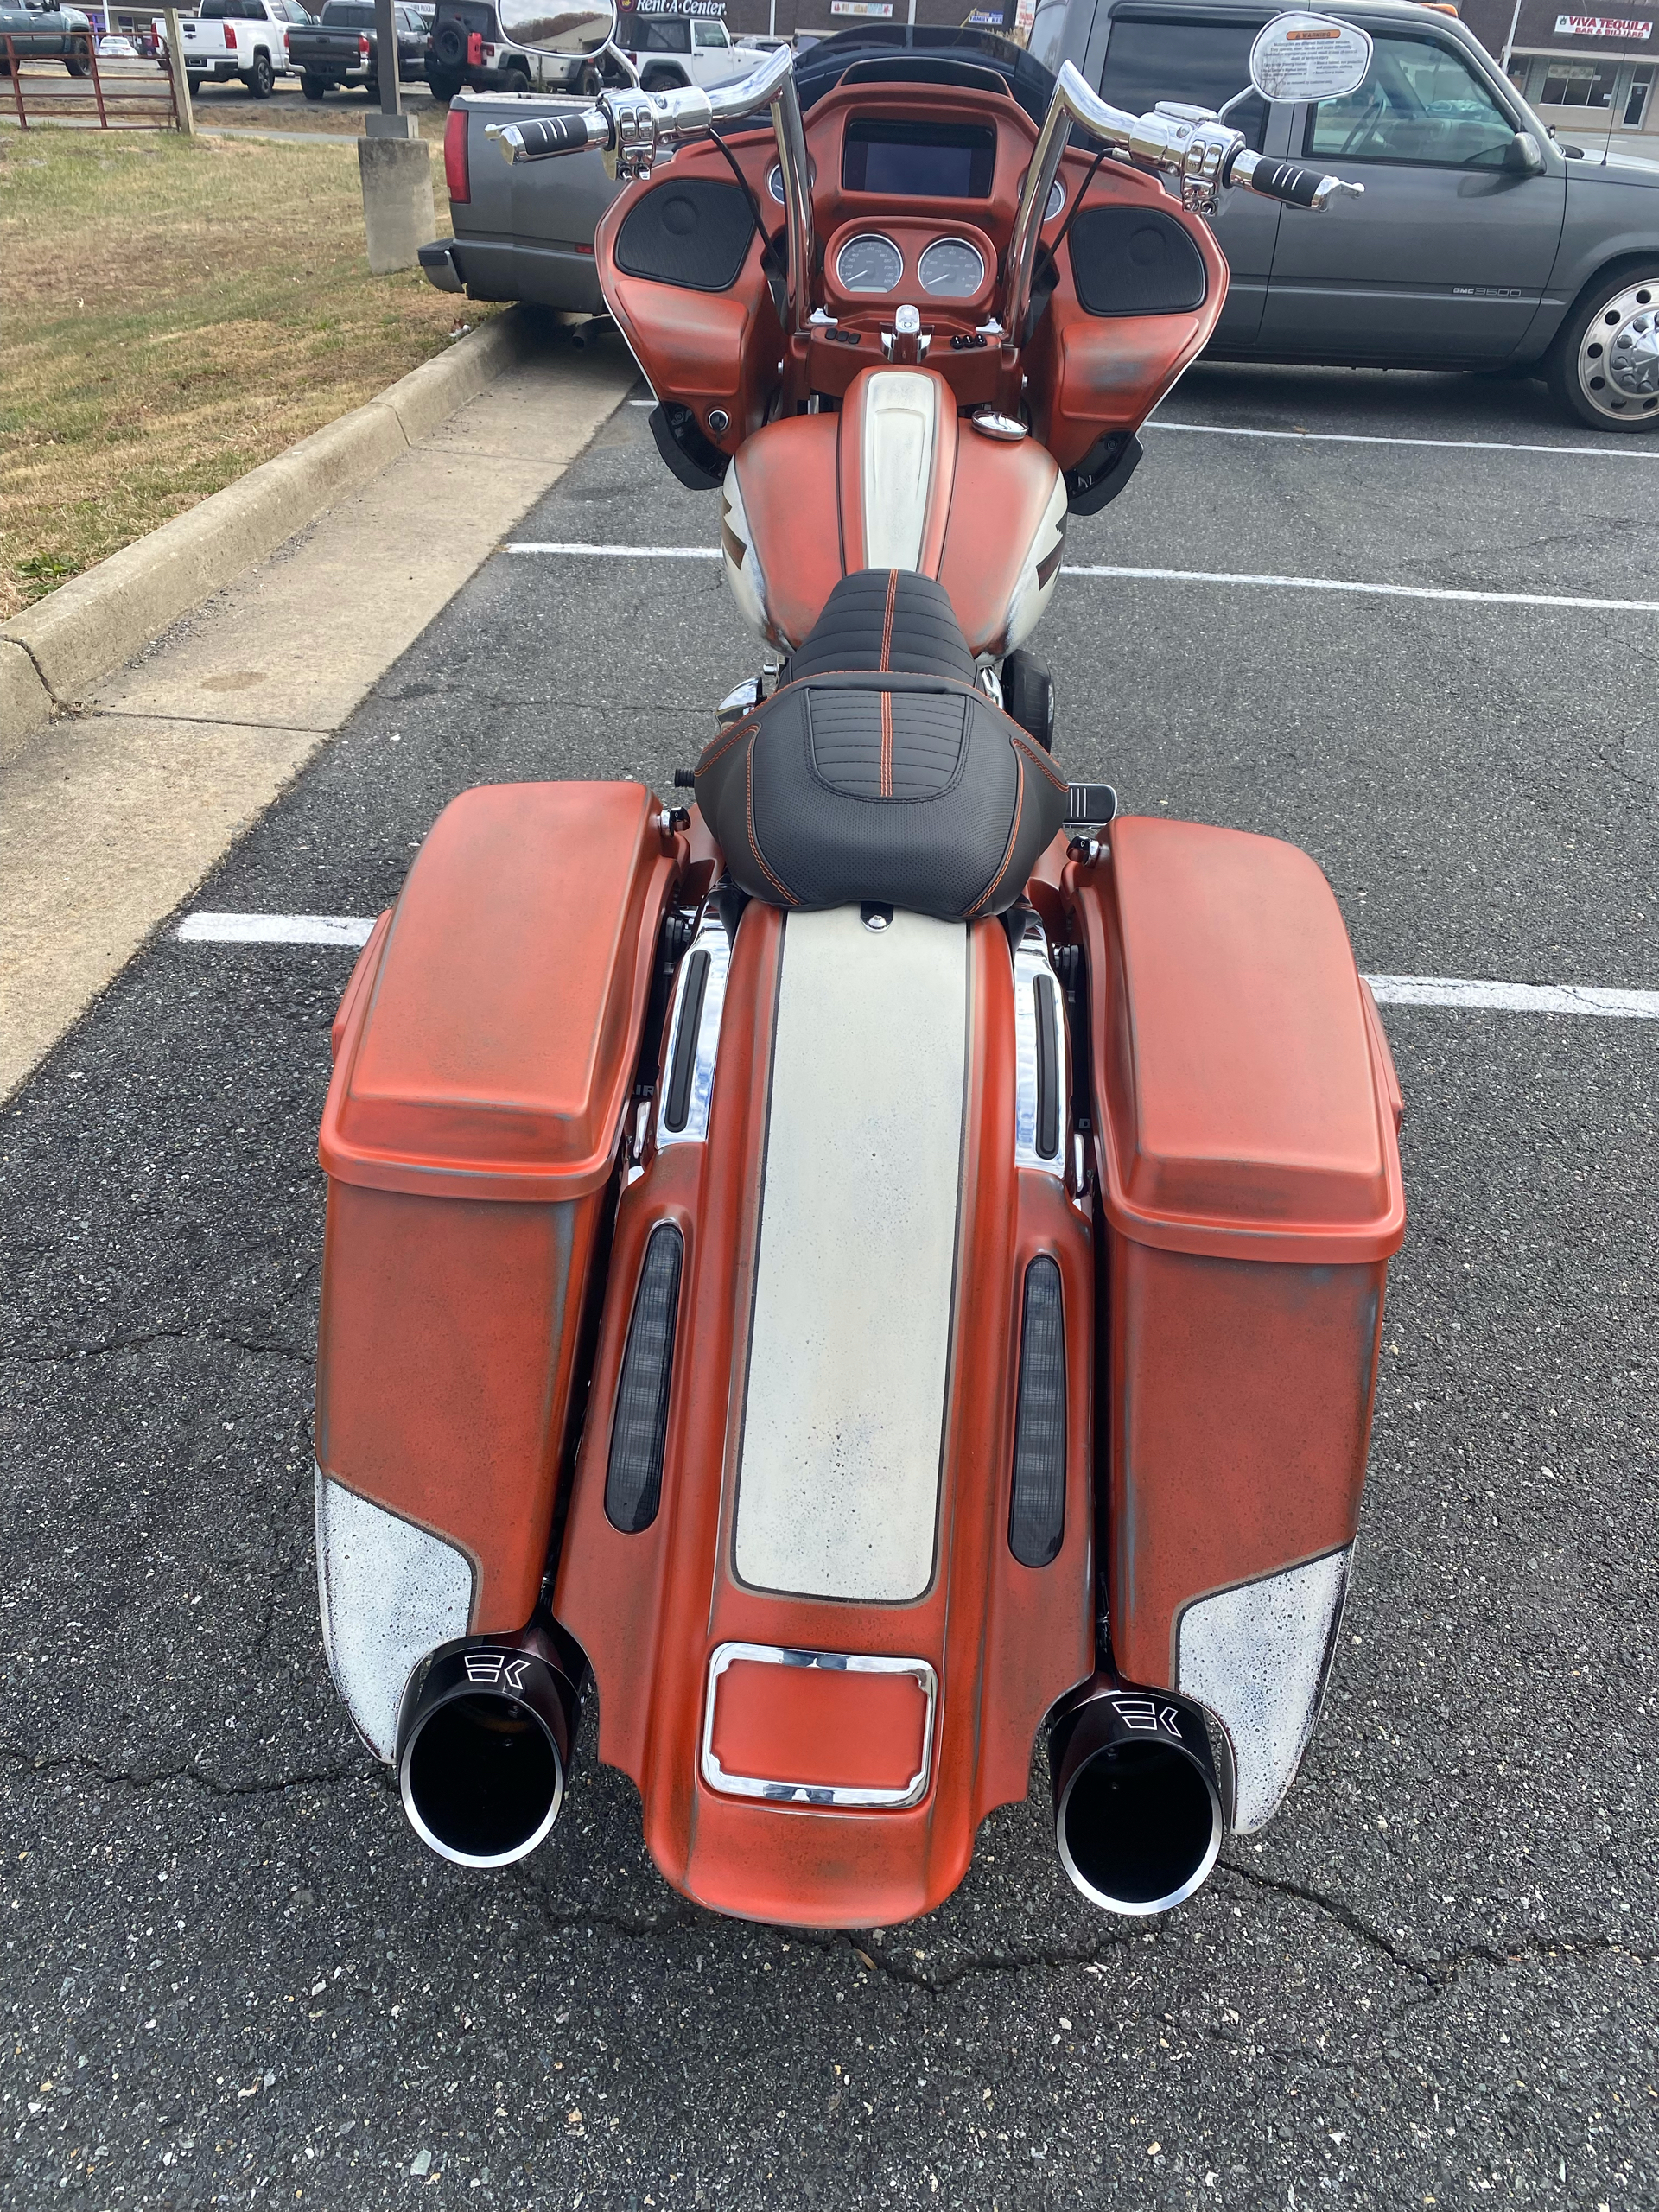 2021 Harley-Davidson Road Glide® Special in Dumfries, Virginia - Photo 2